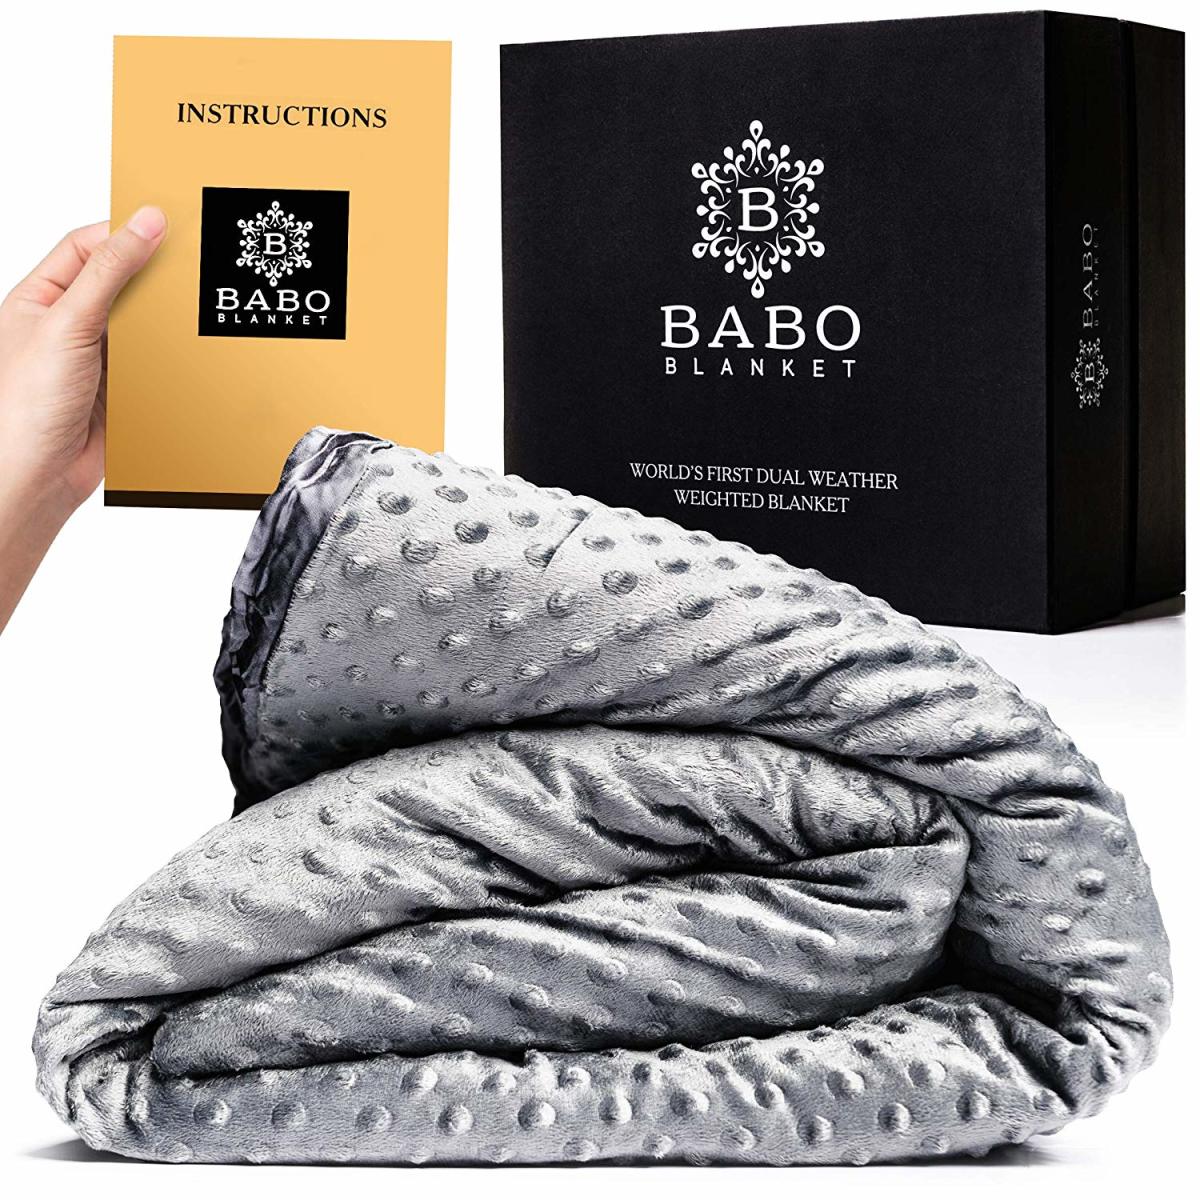 This Cooling Weighted Blanket Is Perfect If You Get Too Hot at Night